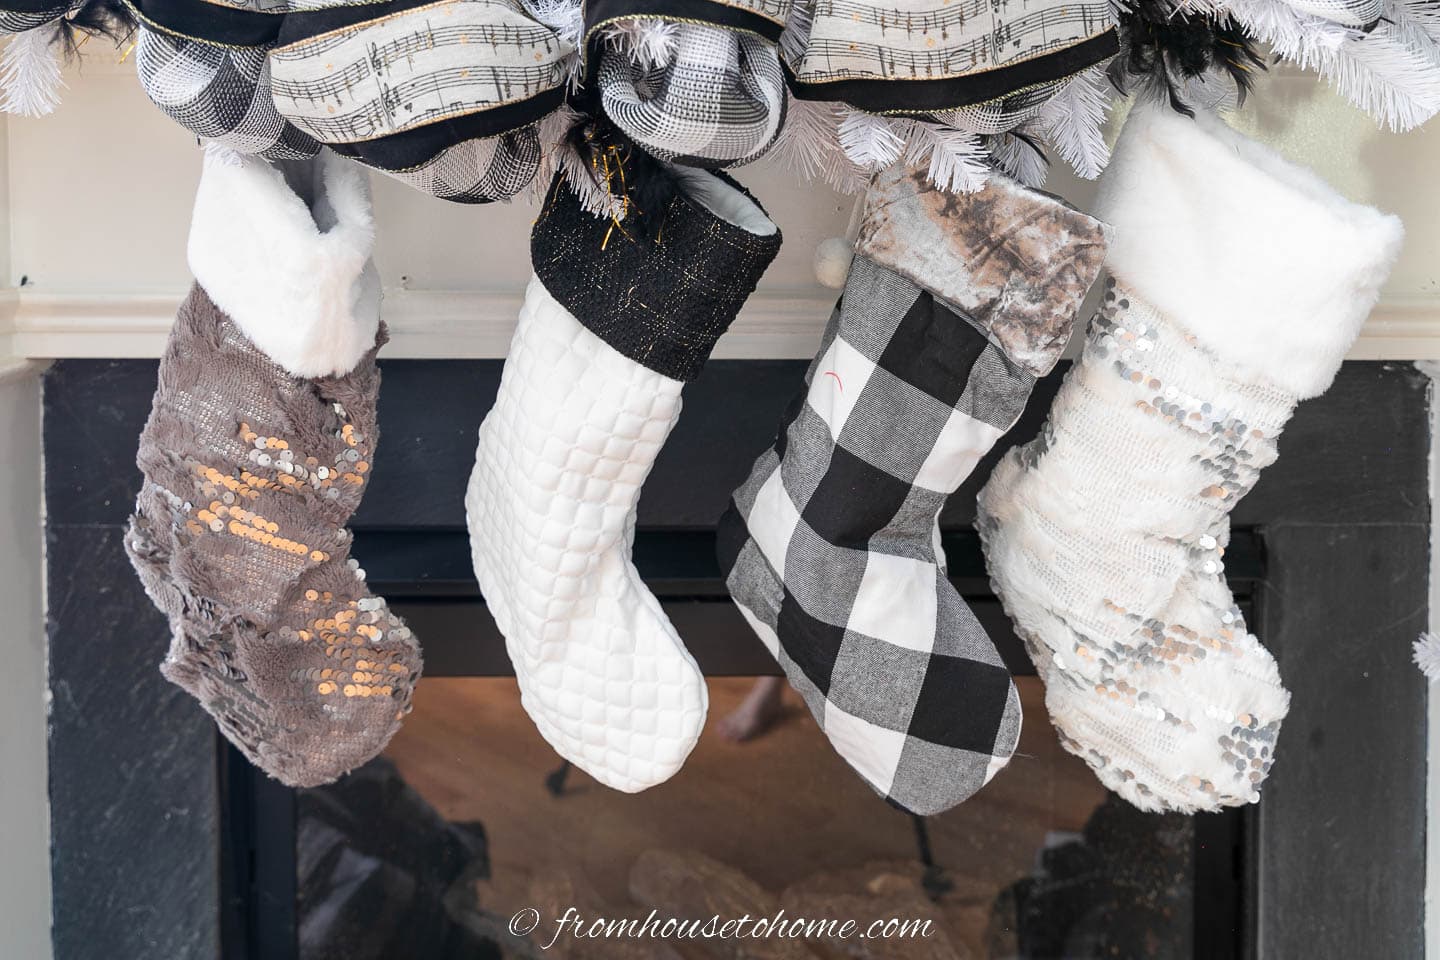 Black and white stockings hung on a fireplace